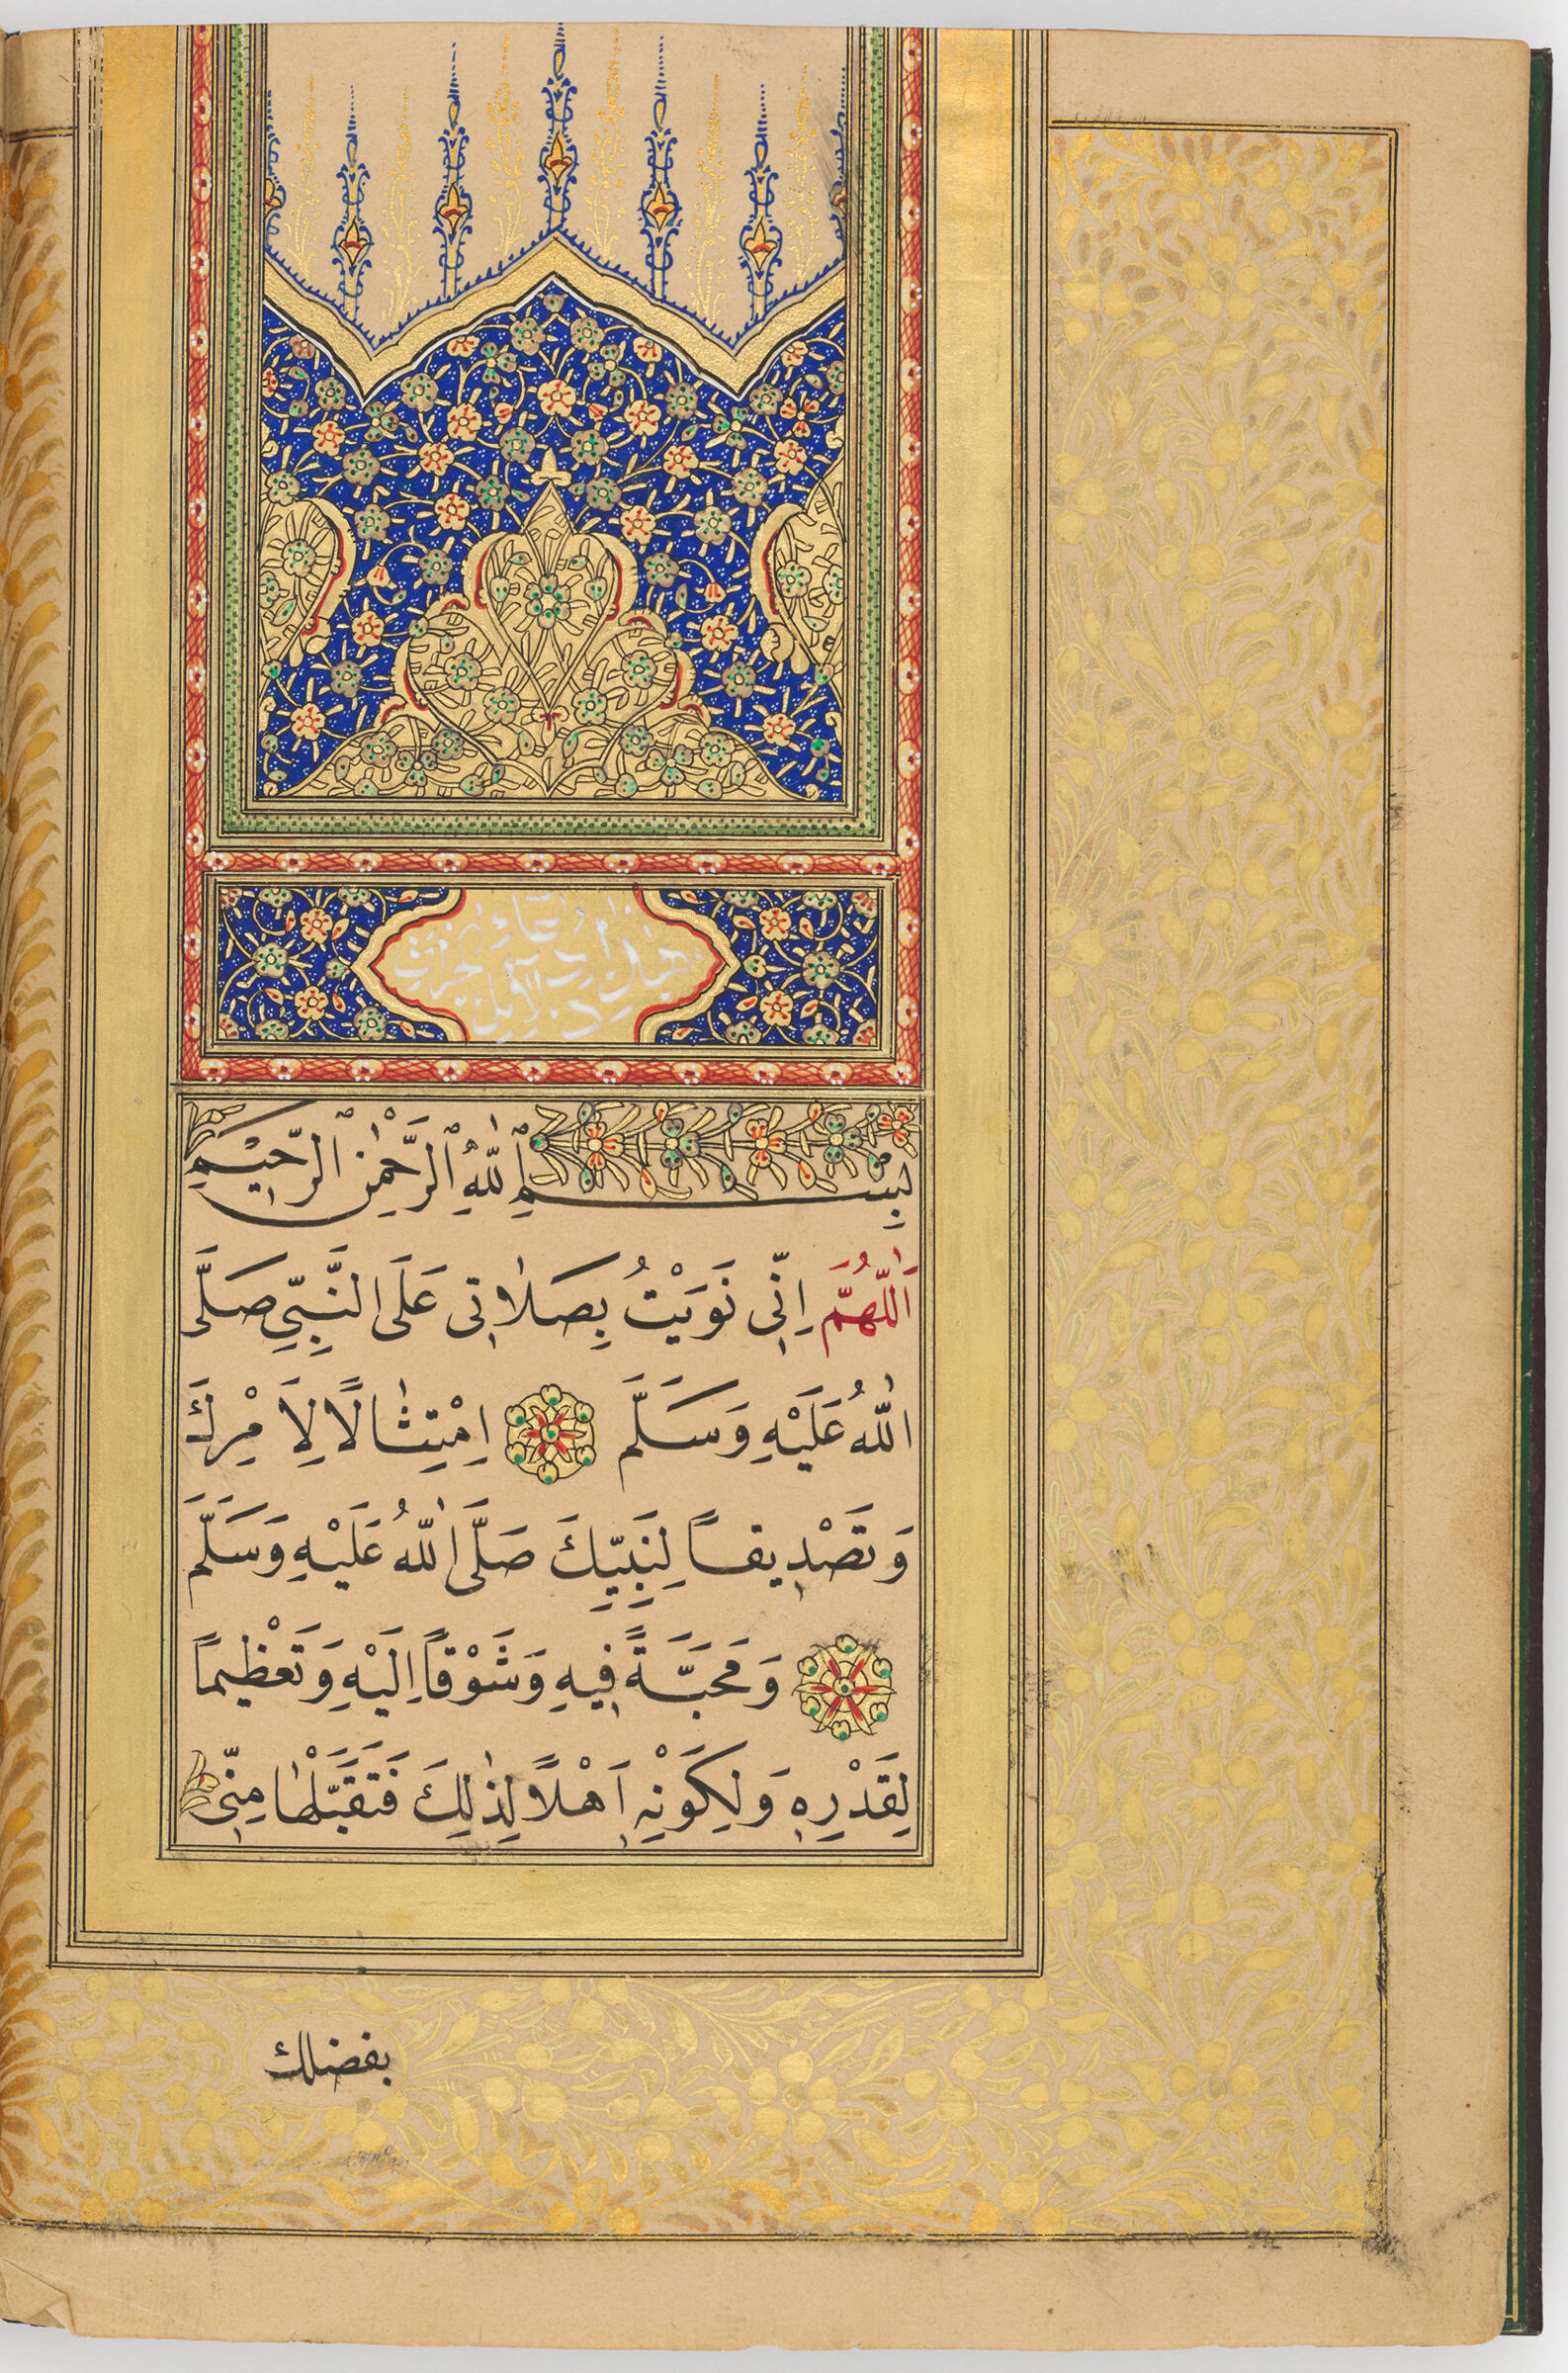 Illuminated Sarlawh Of The Frontispiece (Blank Folio Recto, Illuminated Sarlawh Verso Of Folio 3) From A Manuscript Of Prayers